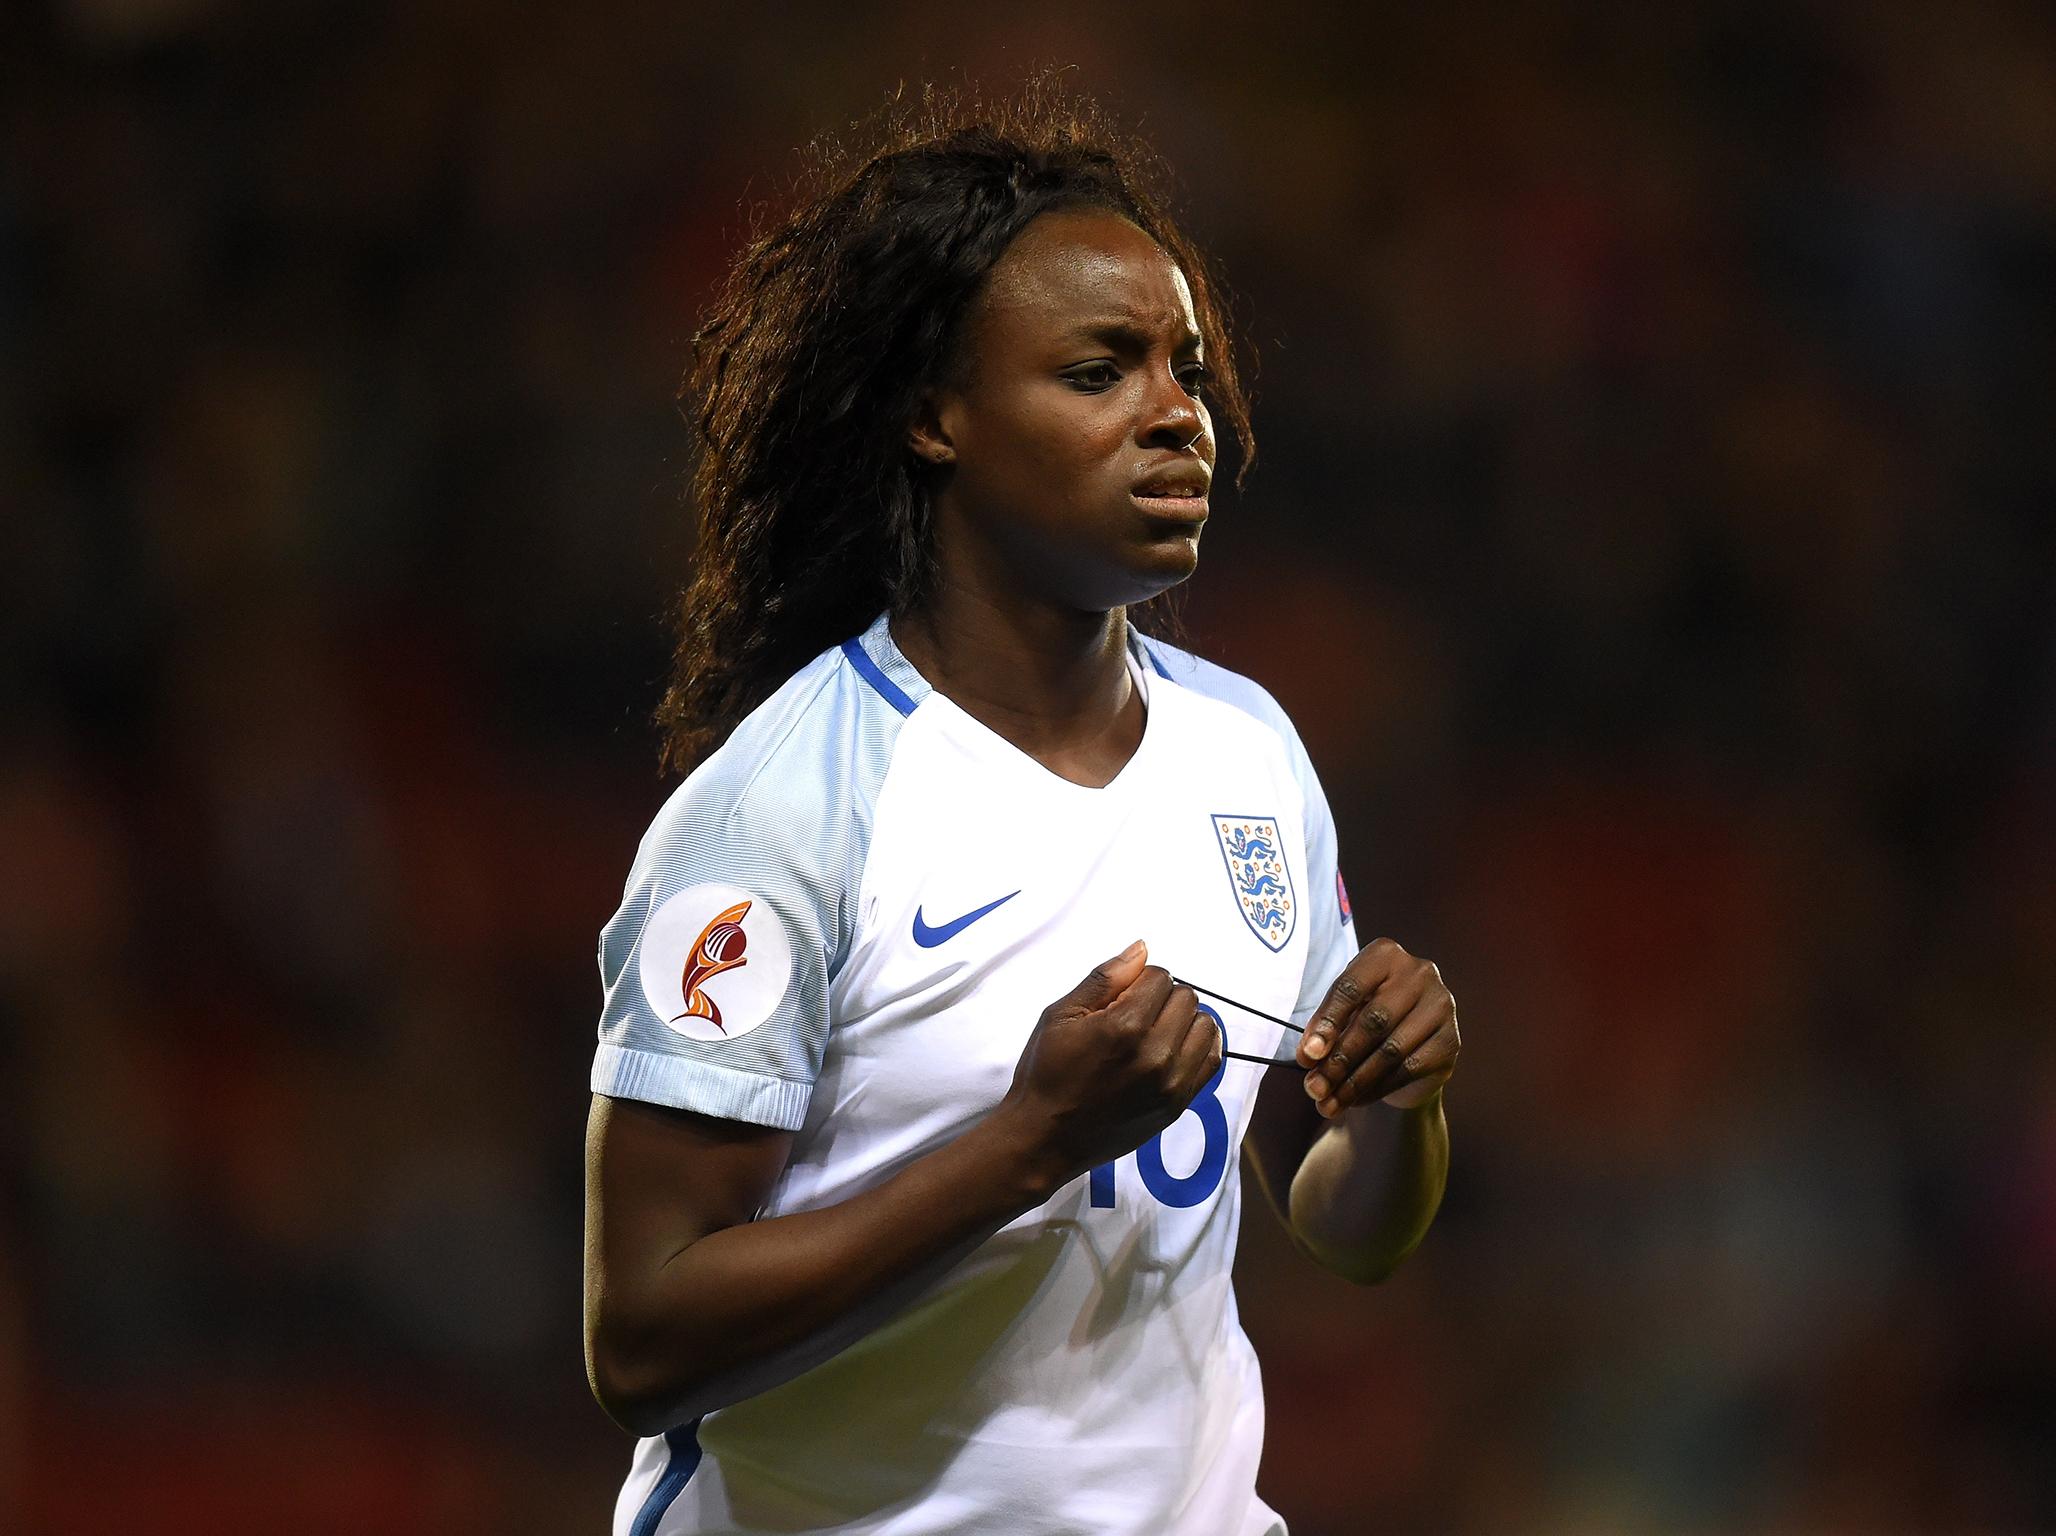 Mark Sampson was accused of racism and bullying against England player Eni Aluko